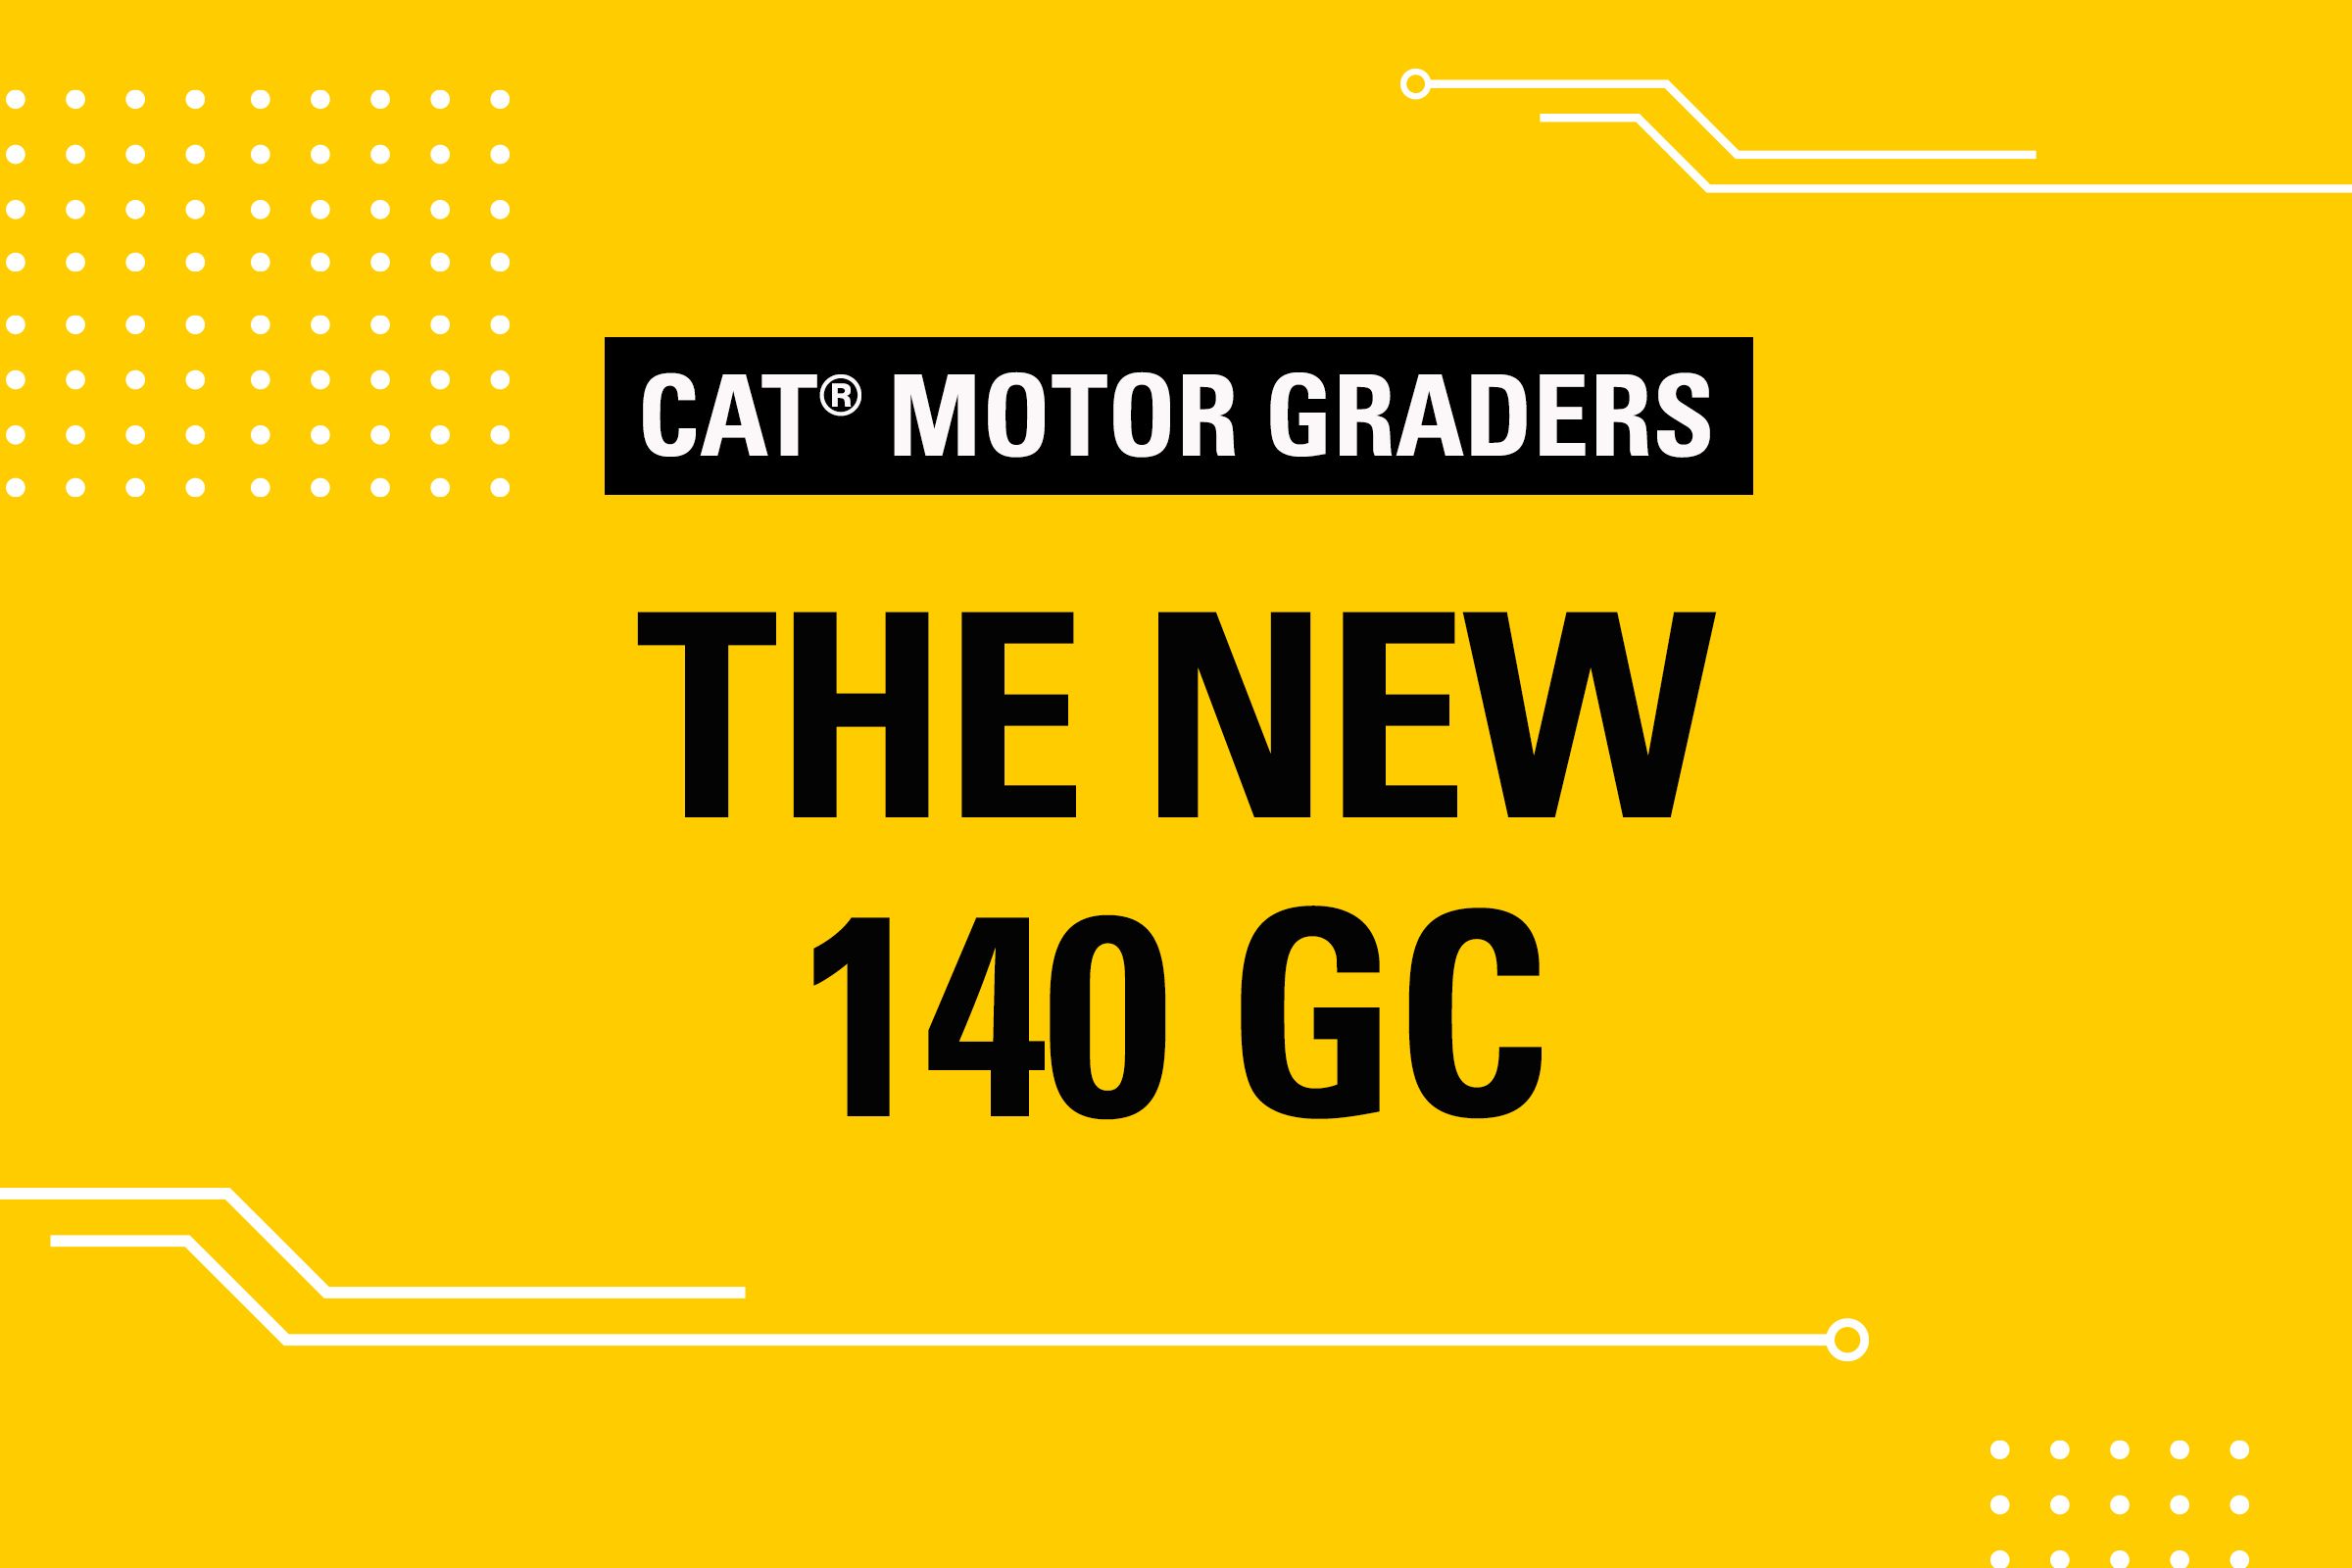 Motor Graders The New 140 GC